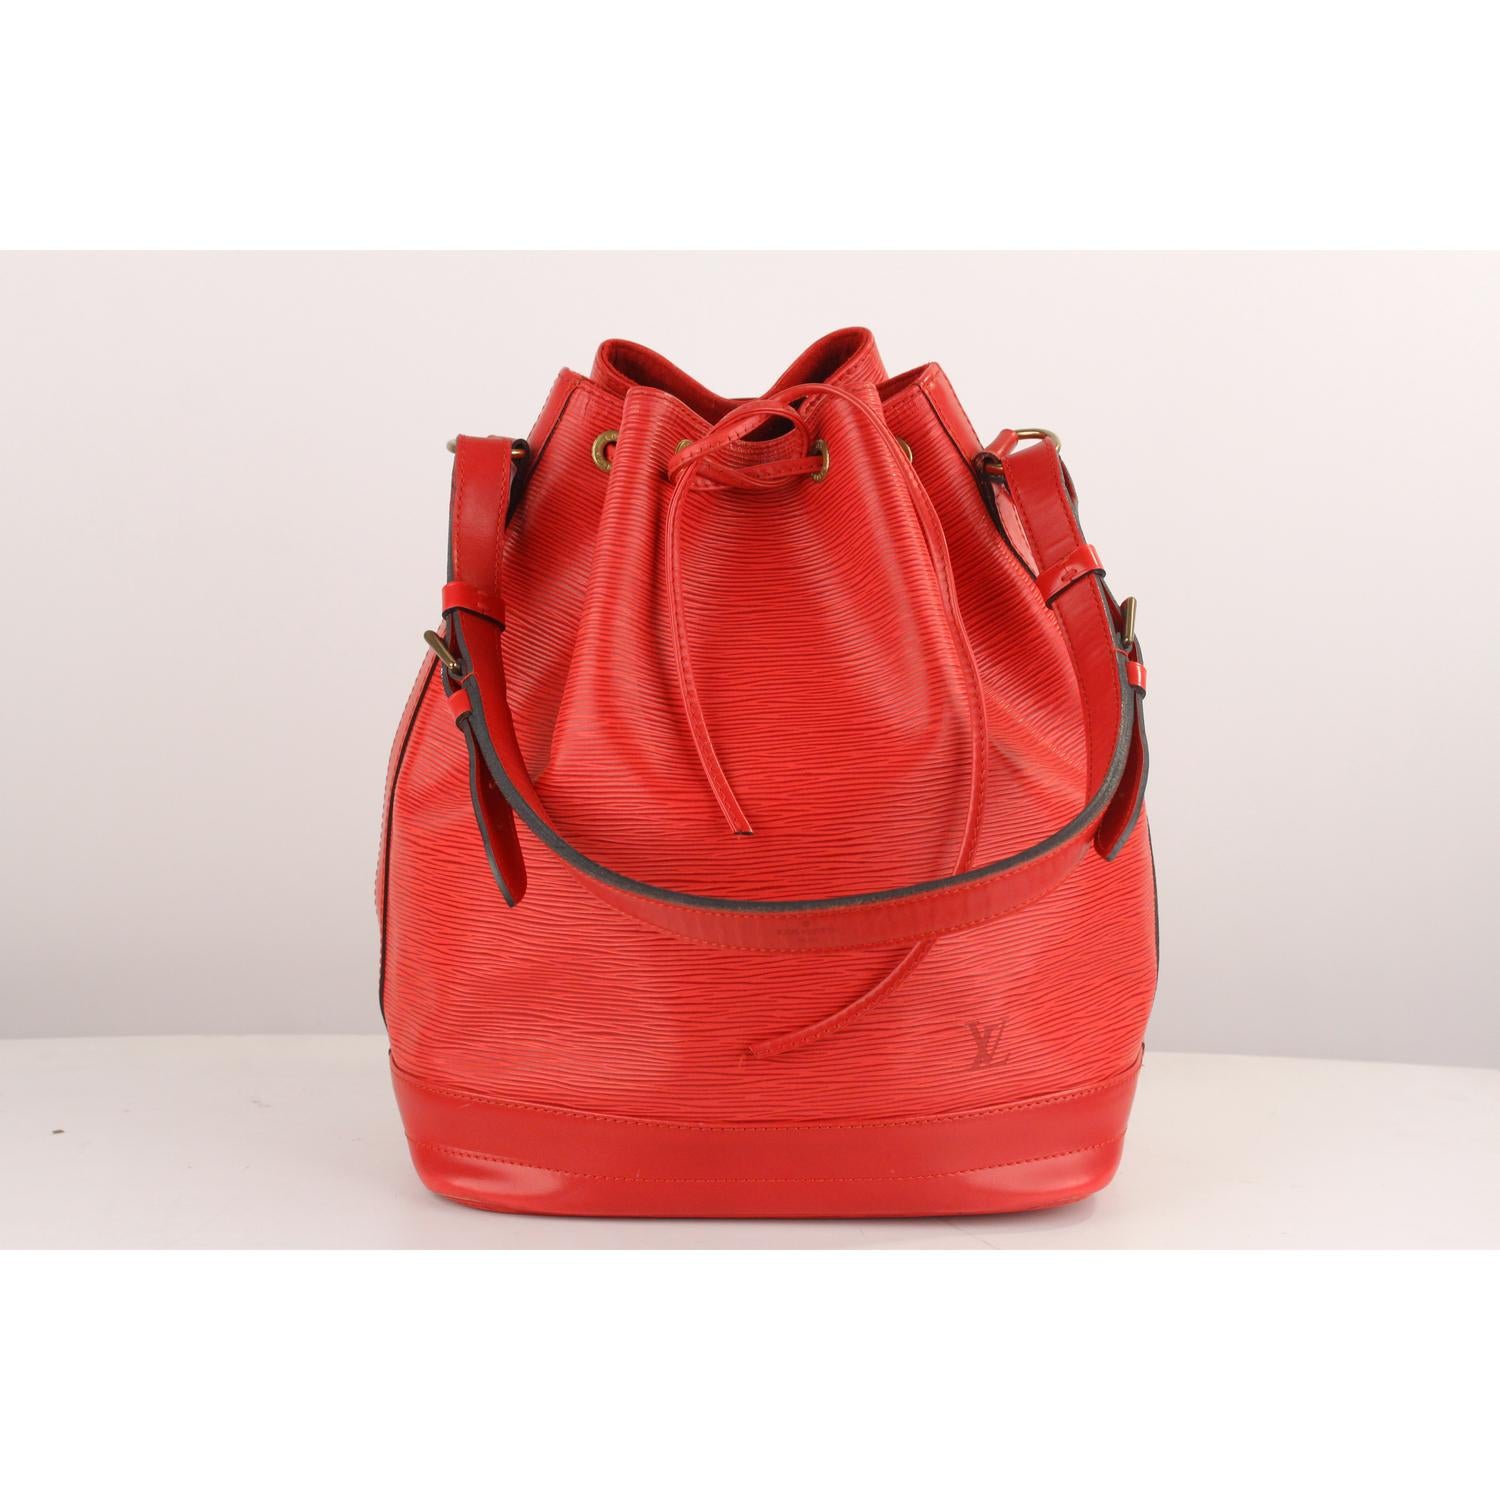 Iconic NOE' by LOUIS VUITTON was first created in 1932 to carry champagne bottles. Red Epi Leather with smooth leather trim, with drawstring closure and Leather and microfibrer lining. 1 side zip pocket inside, Adjustable shoulder strap

Logos /